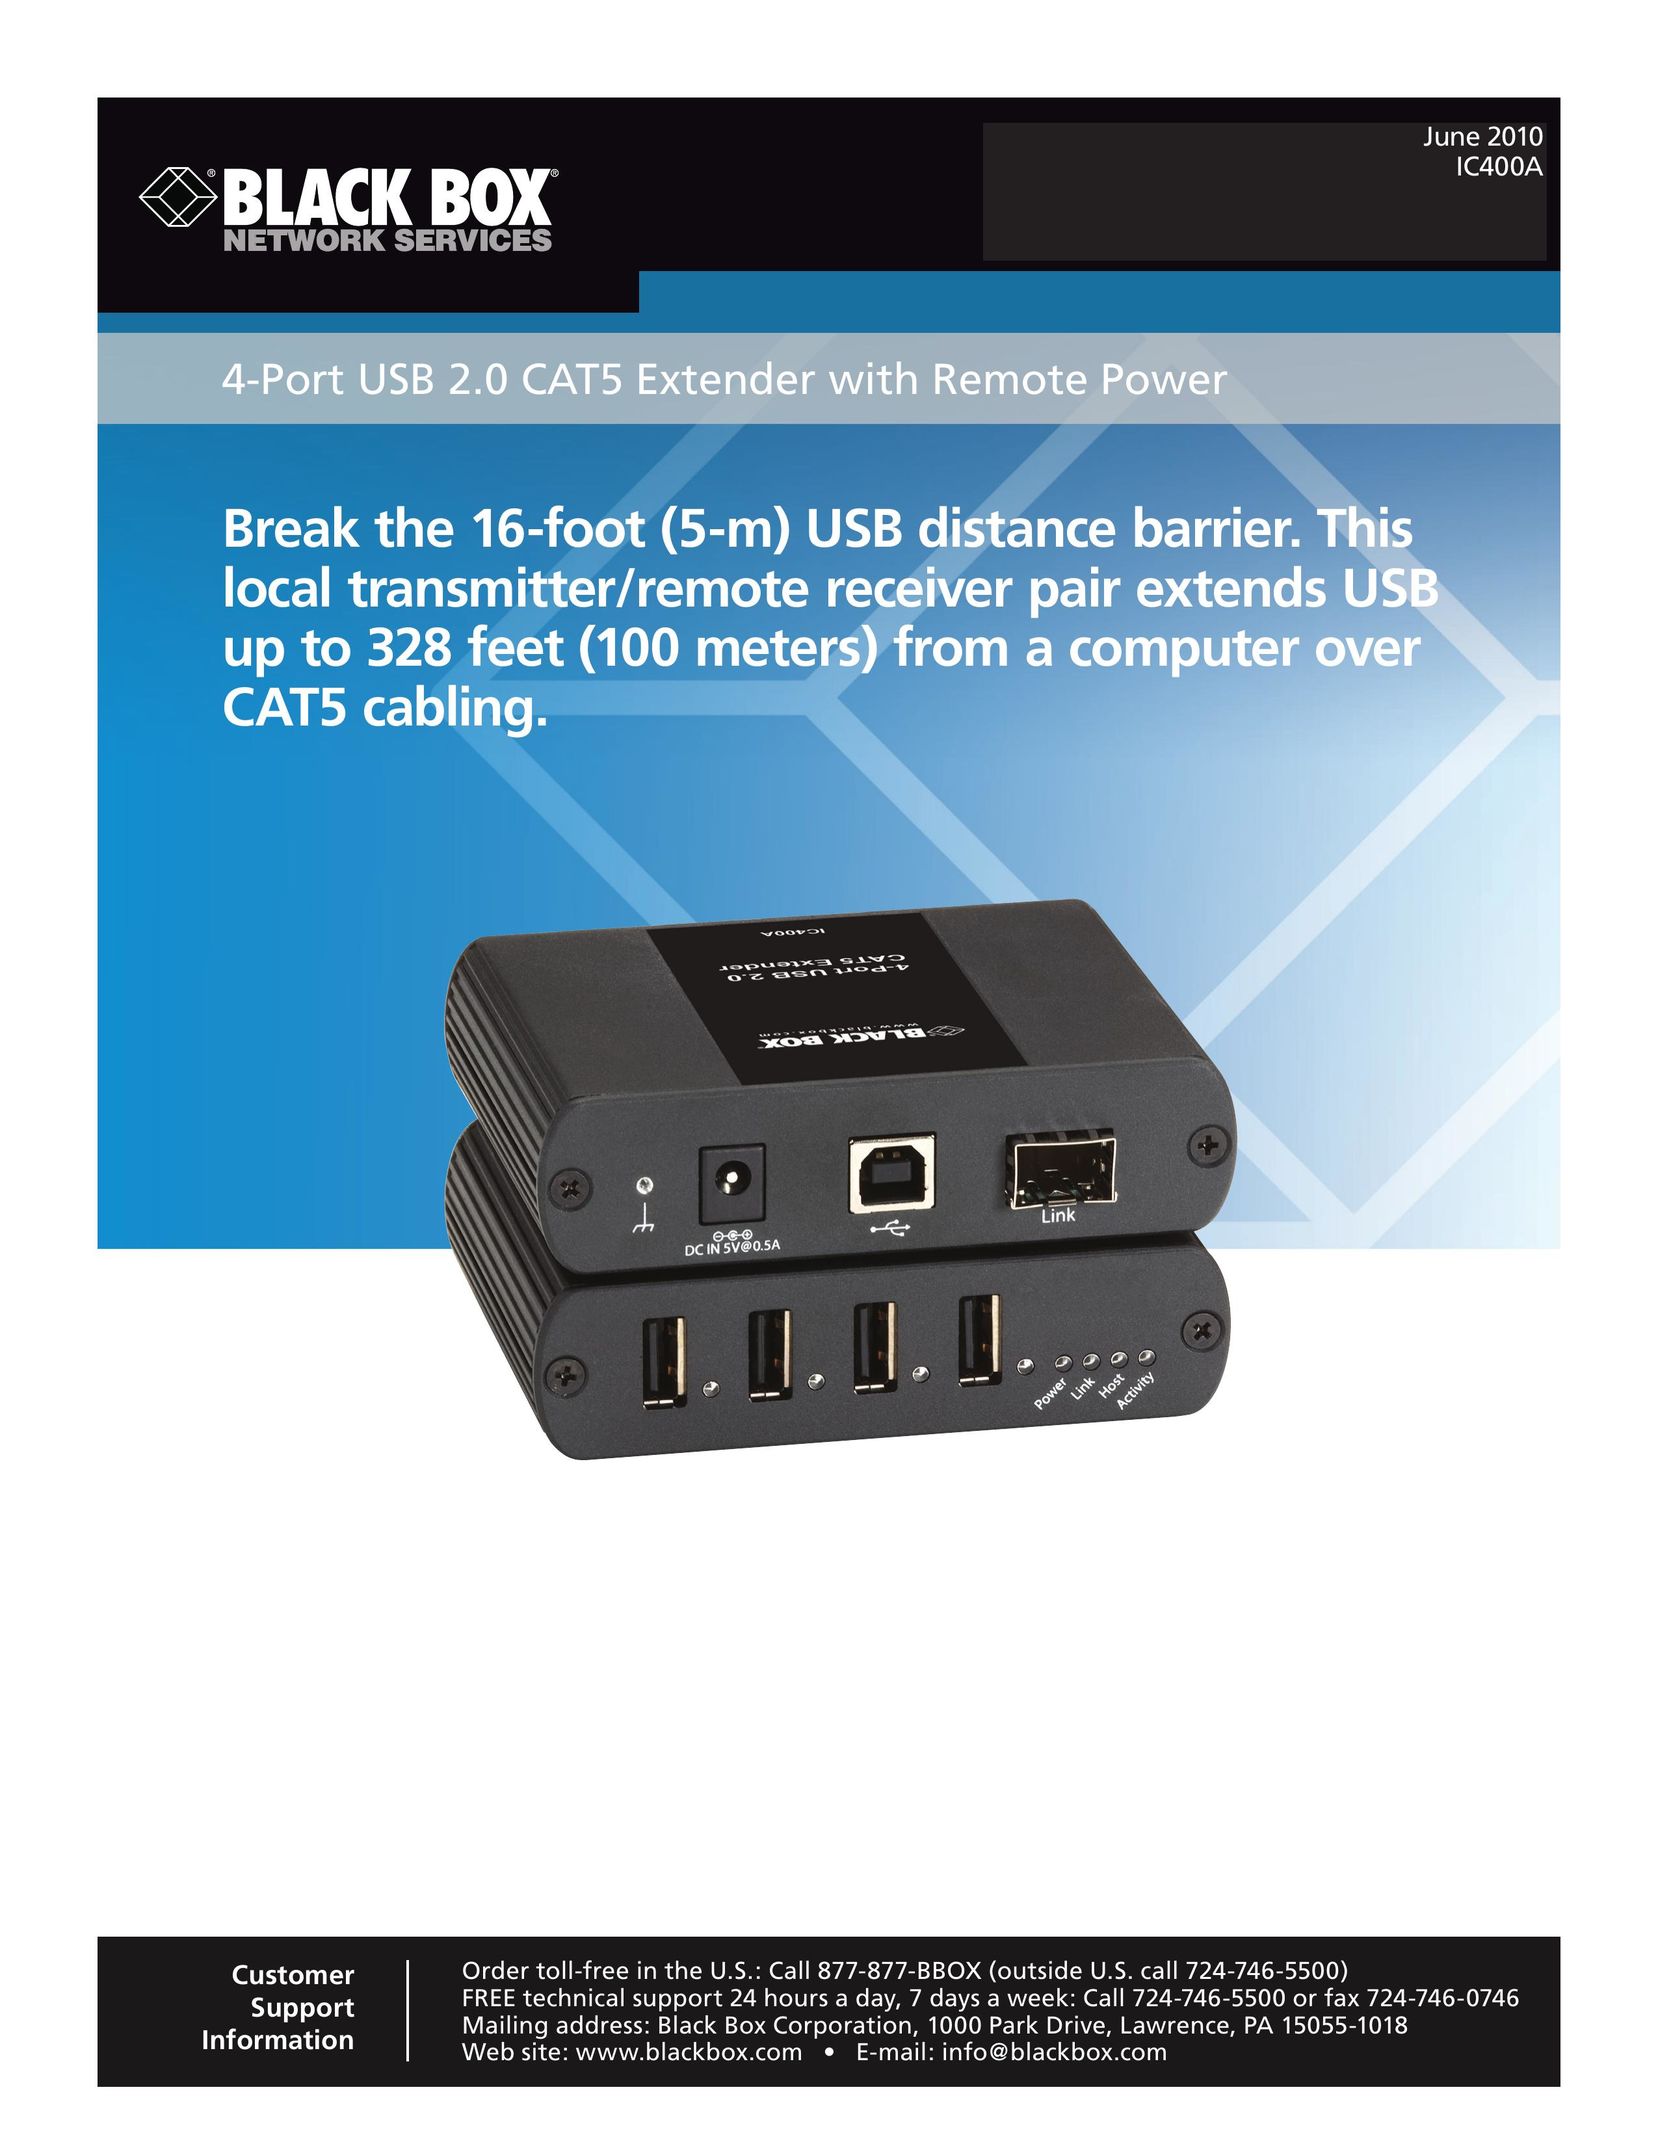 Black Box 4-Port USB 2.0 CAT5 Extender with Remote Power Router User Manual